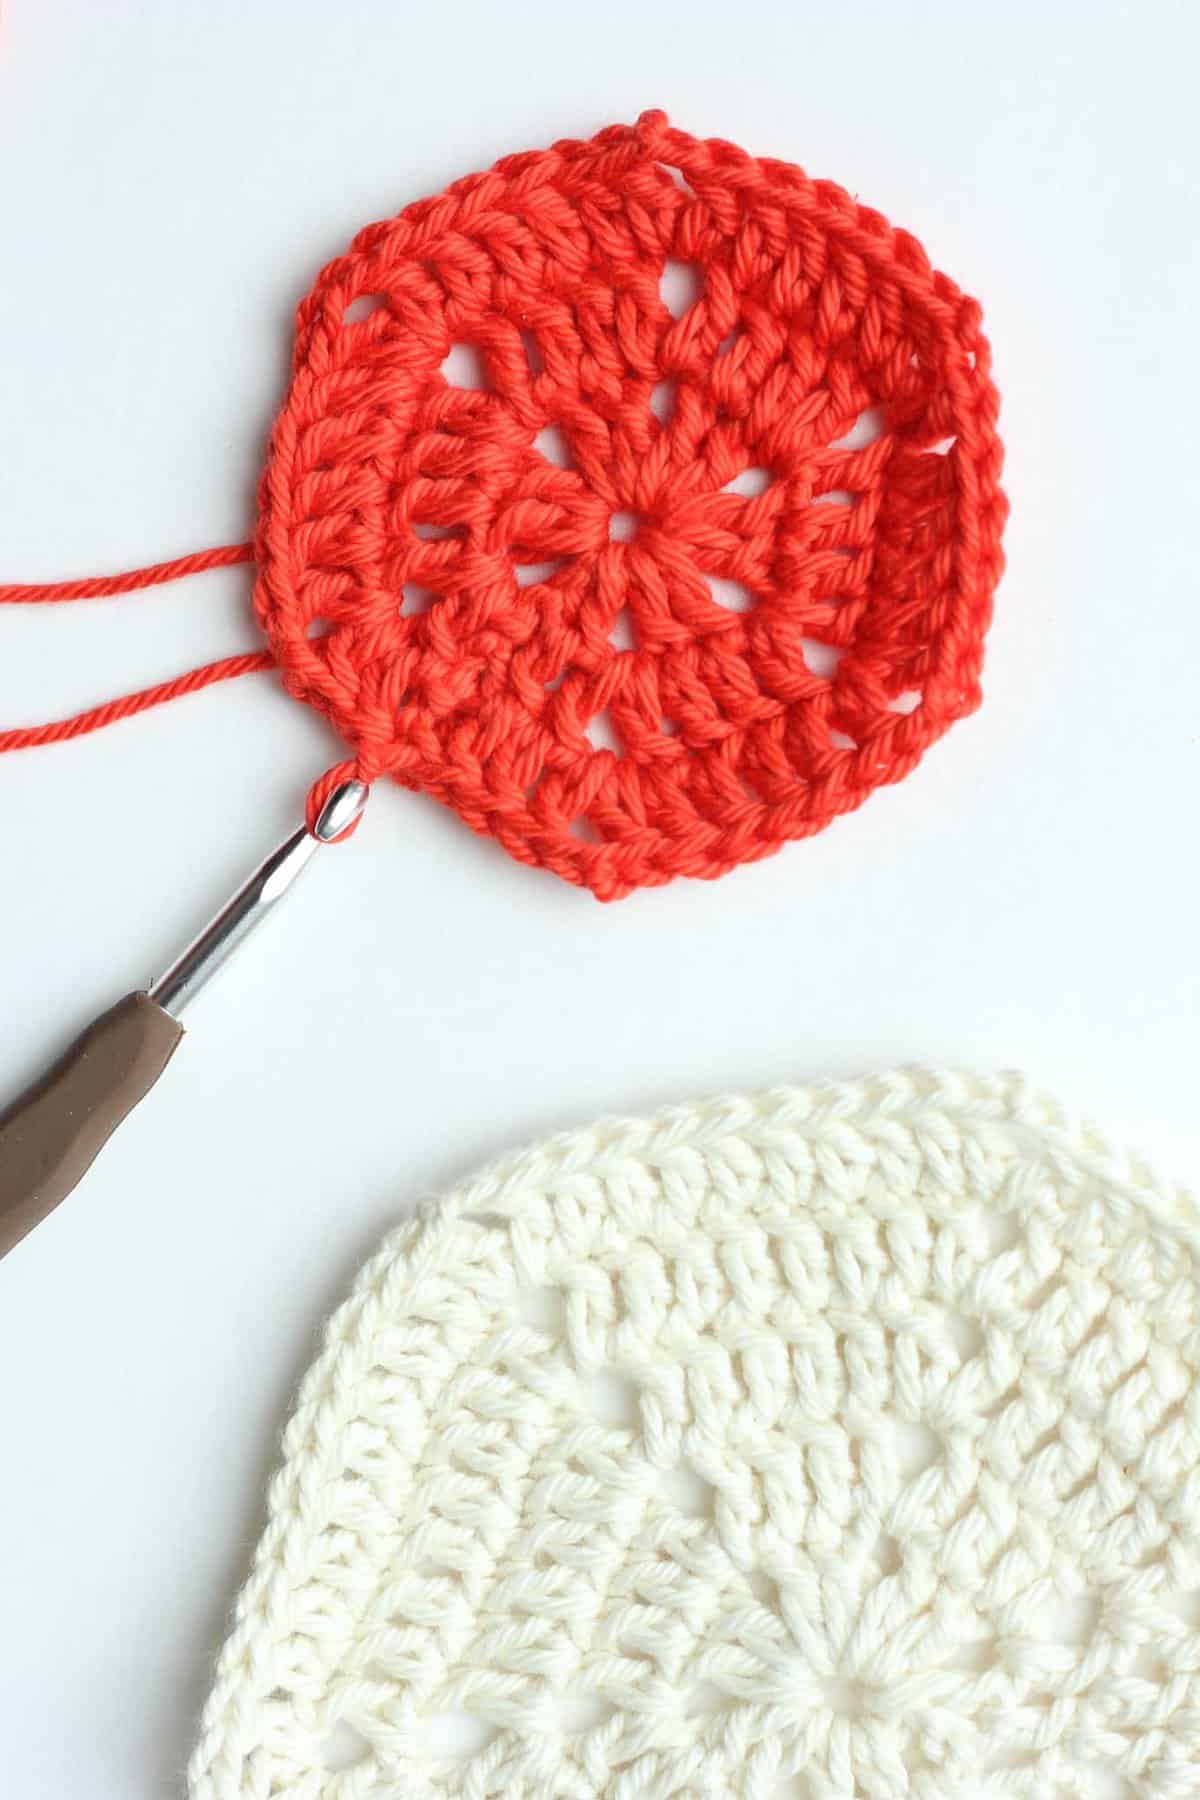 Free pattern for a basic crochet hexagon. Super clear step-by-step photo tutorial. This pattern can be used to make any size hexagon for pillows, rugs, patchwork afghans or even clothes. | MakeAndDoCrew.com